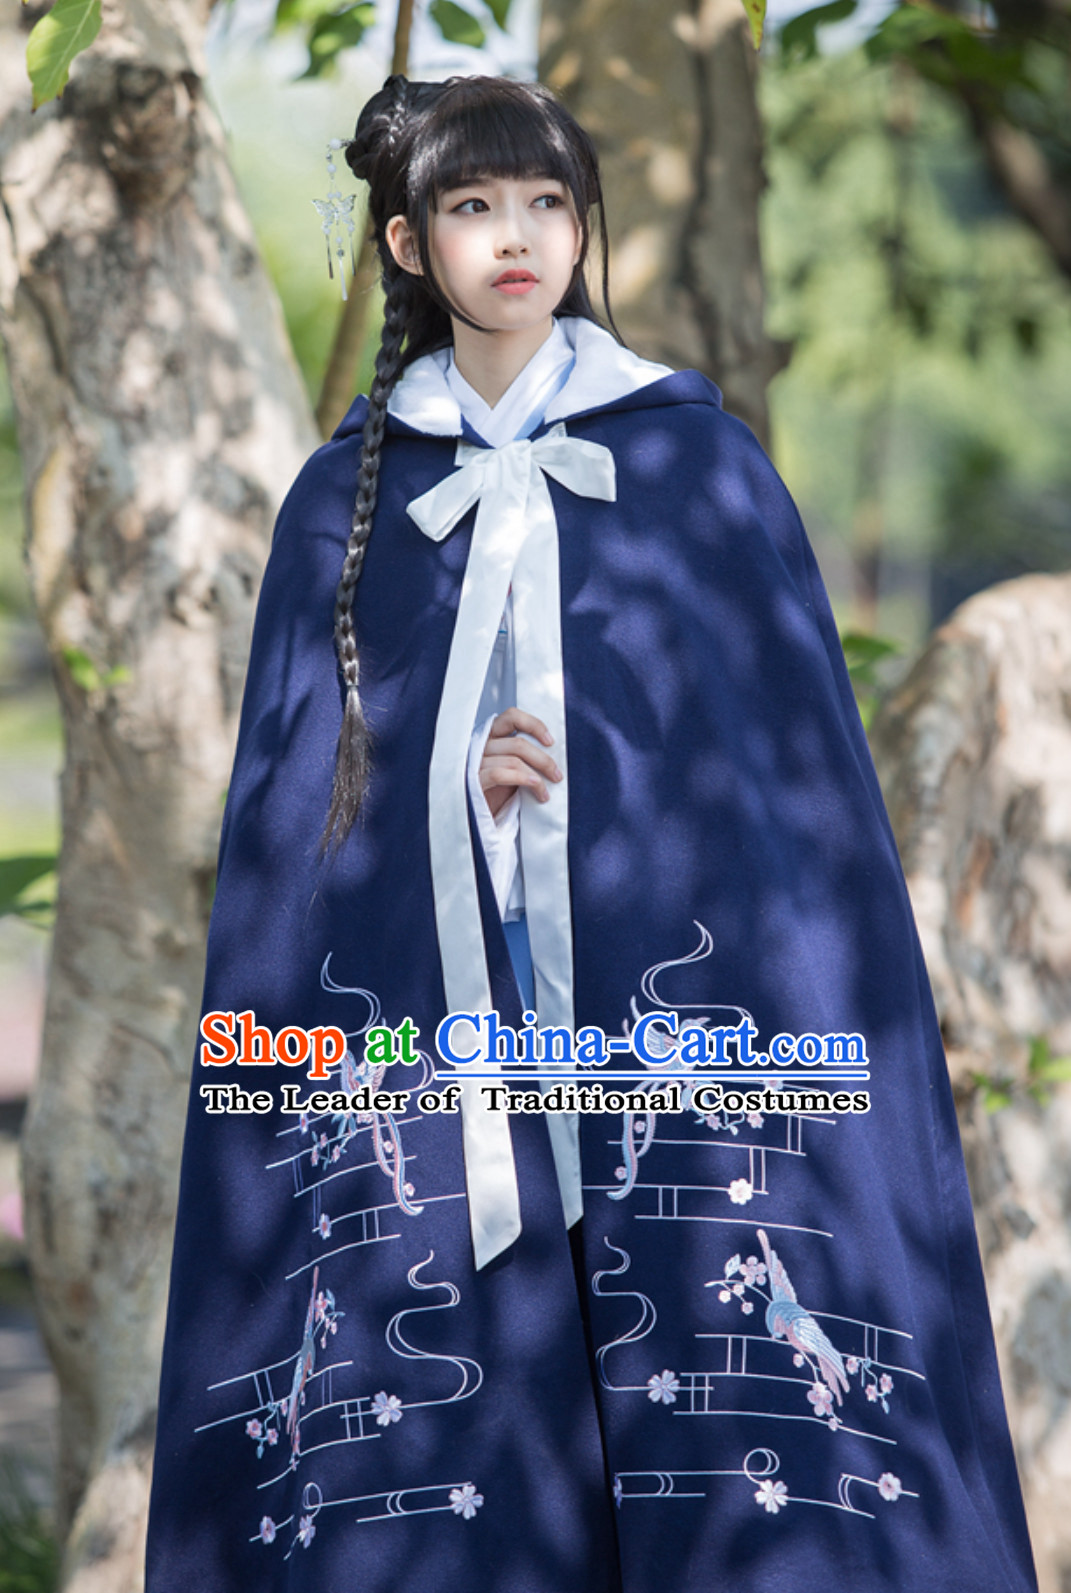 Ancient Chinese Style Embroidered Mantle Cape Hanfu Dress